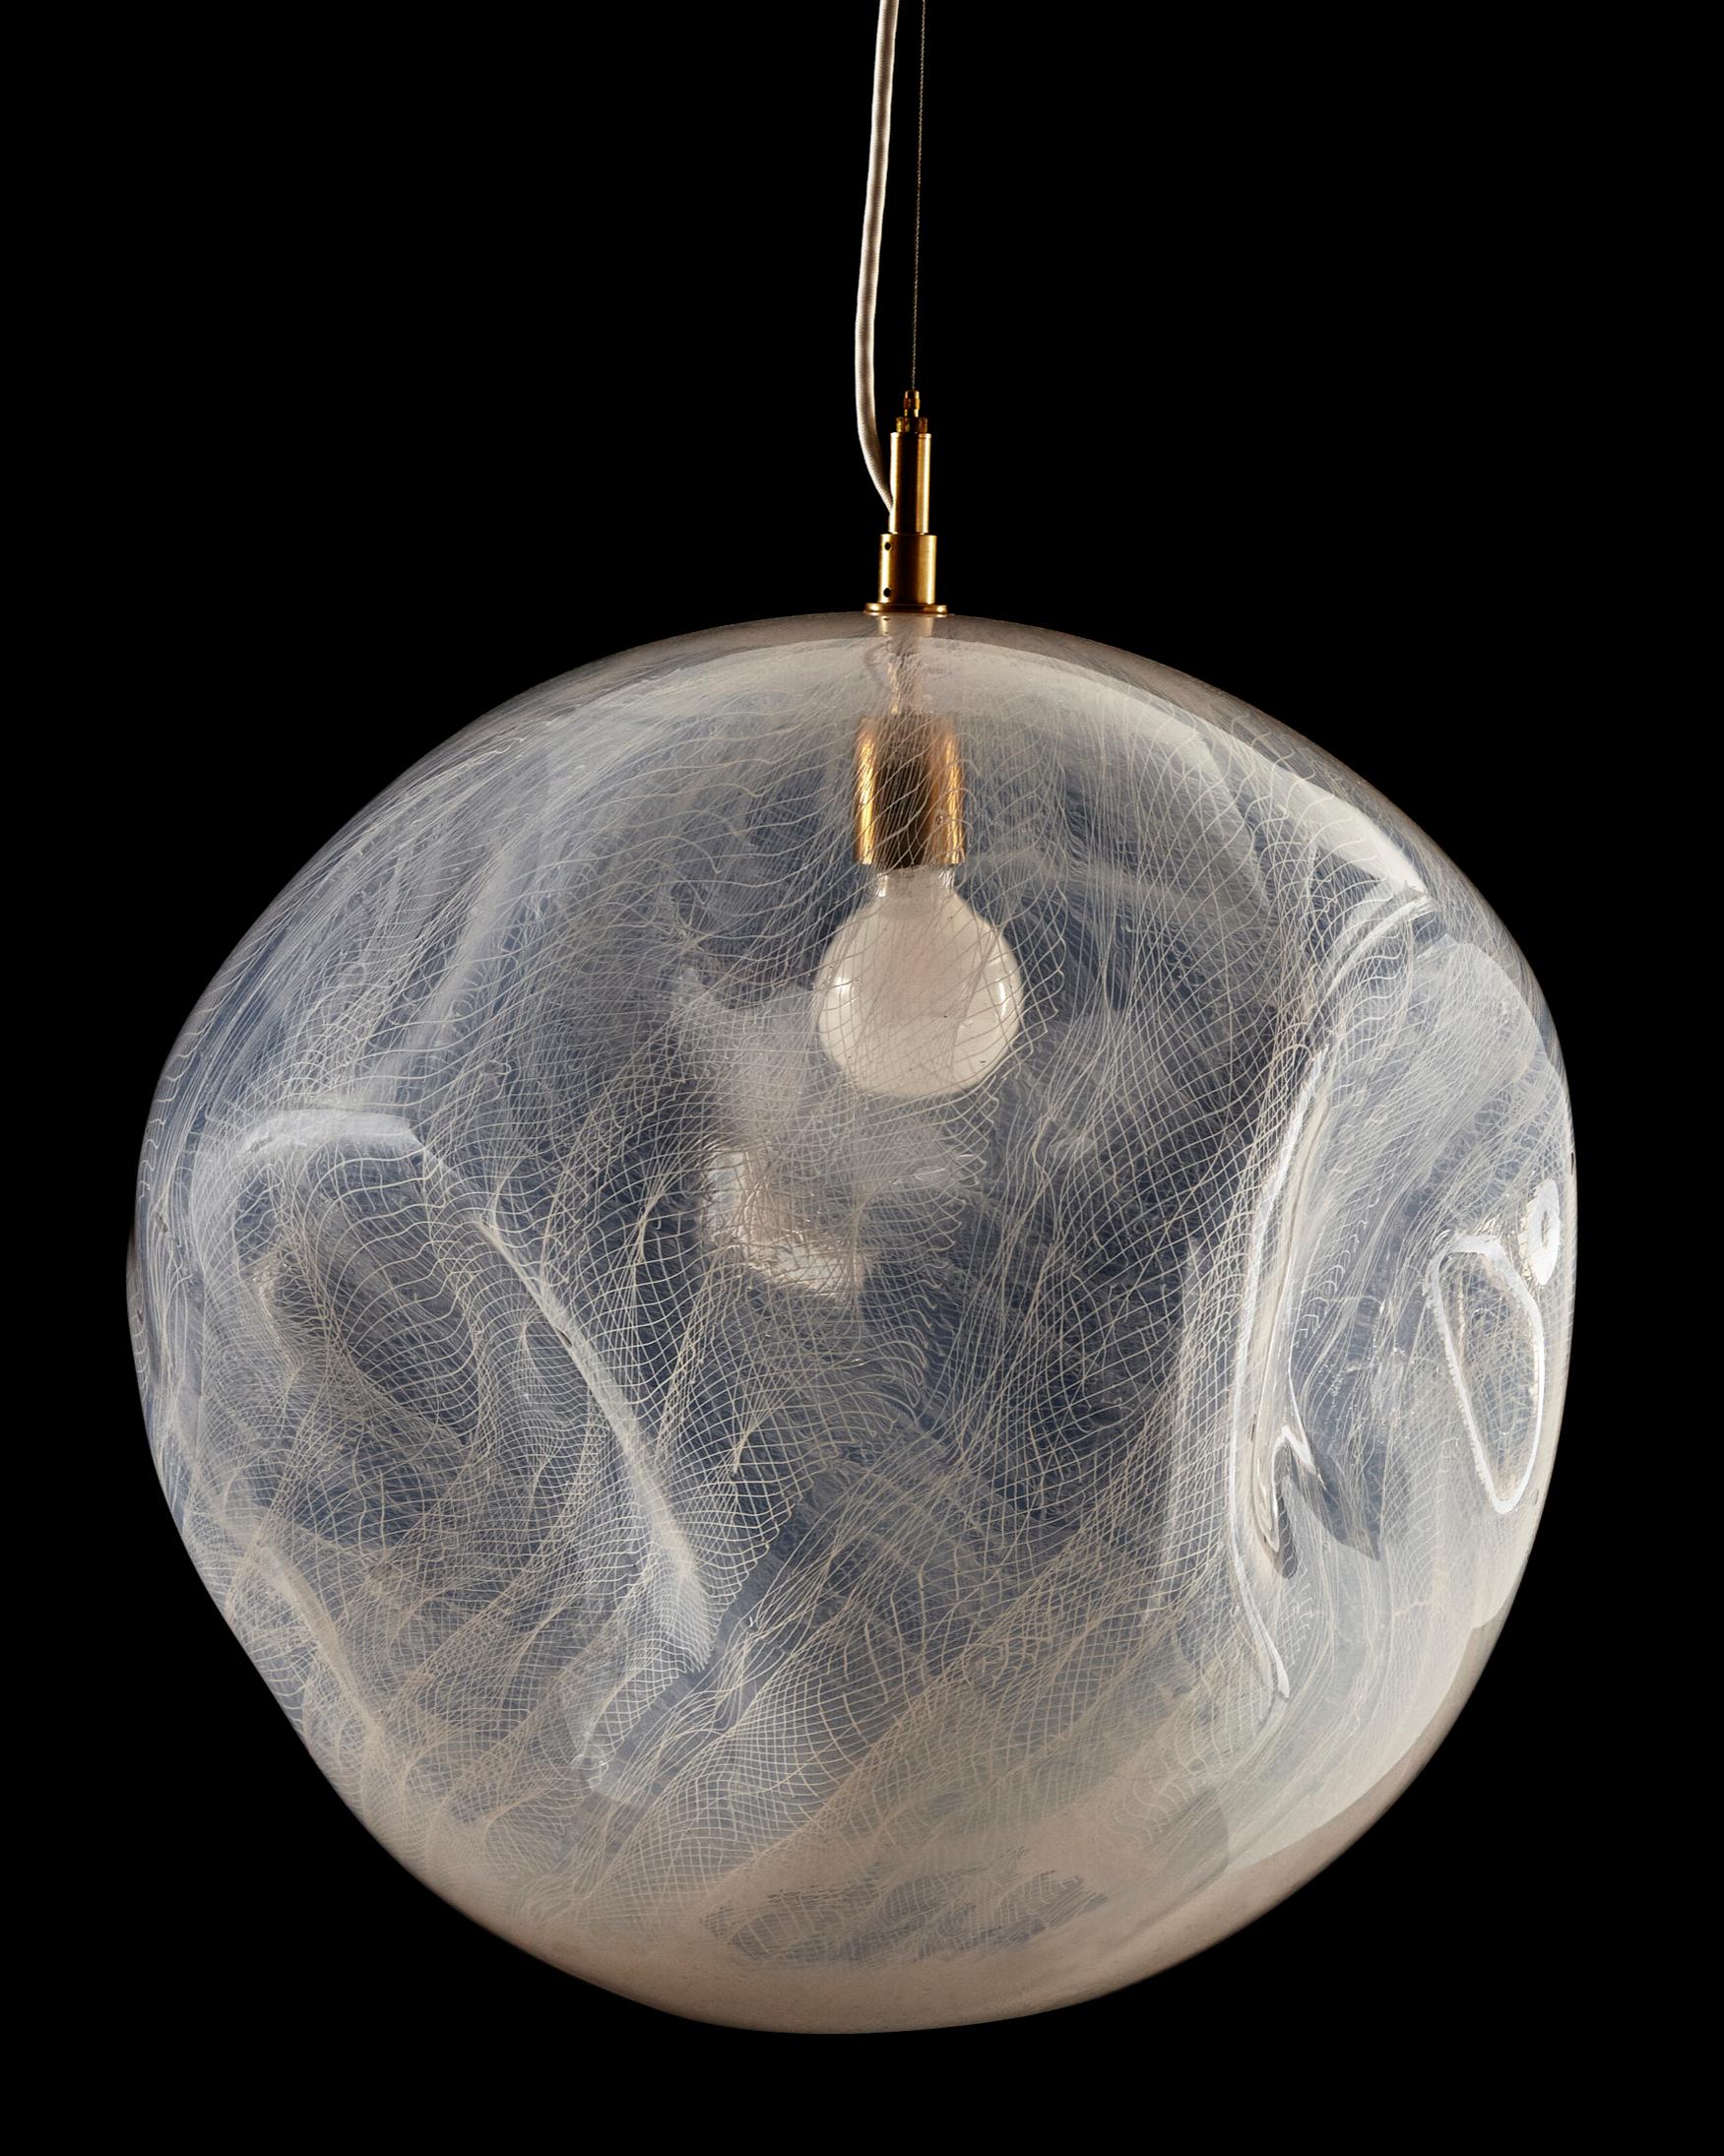 Unique illuminated sculptural pendant in hand blown filigree glass. Designed and made by Jeff Zimmerman and James Mongrain, USA, 2019.